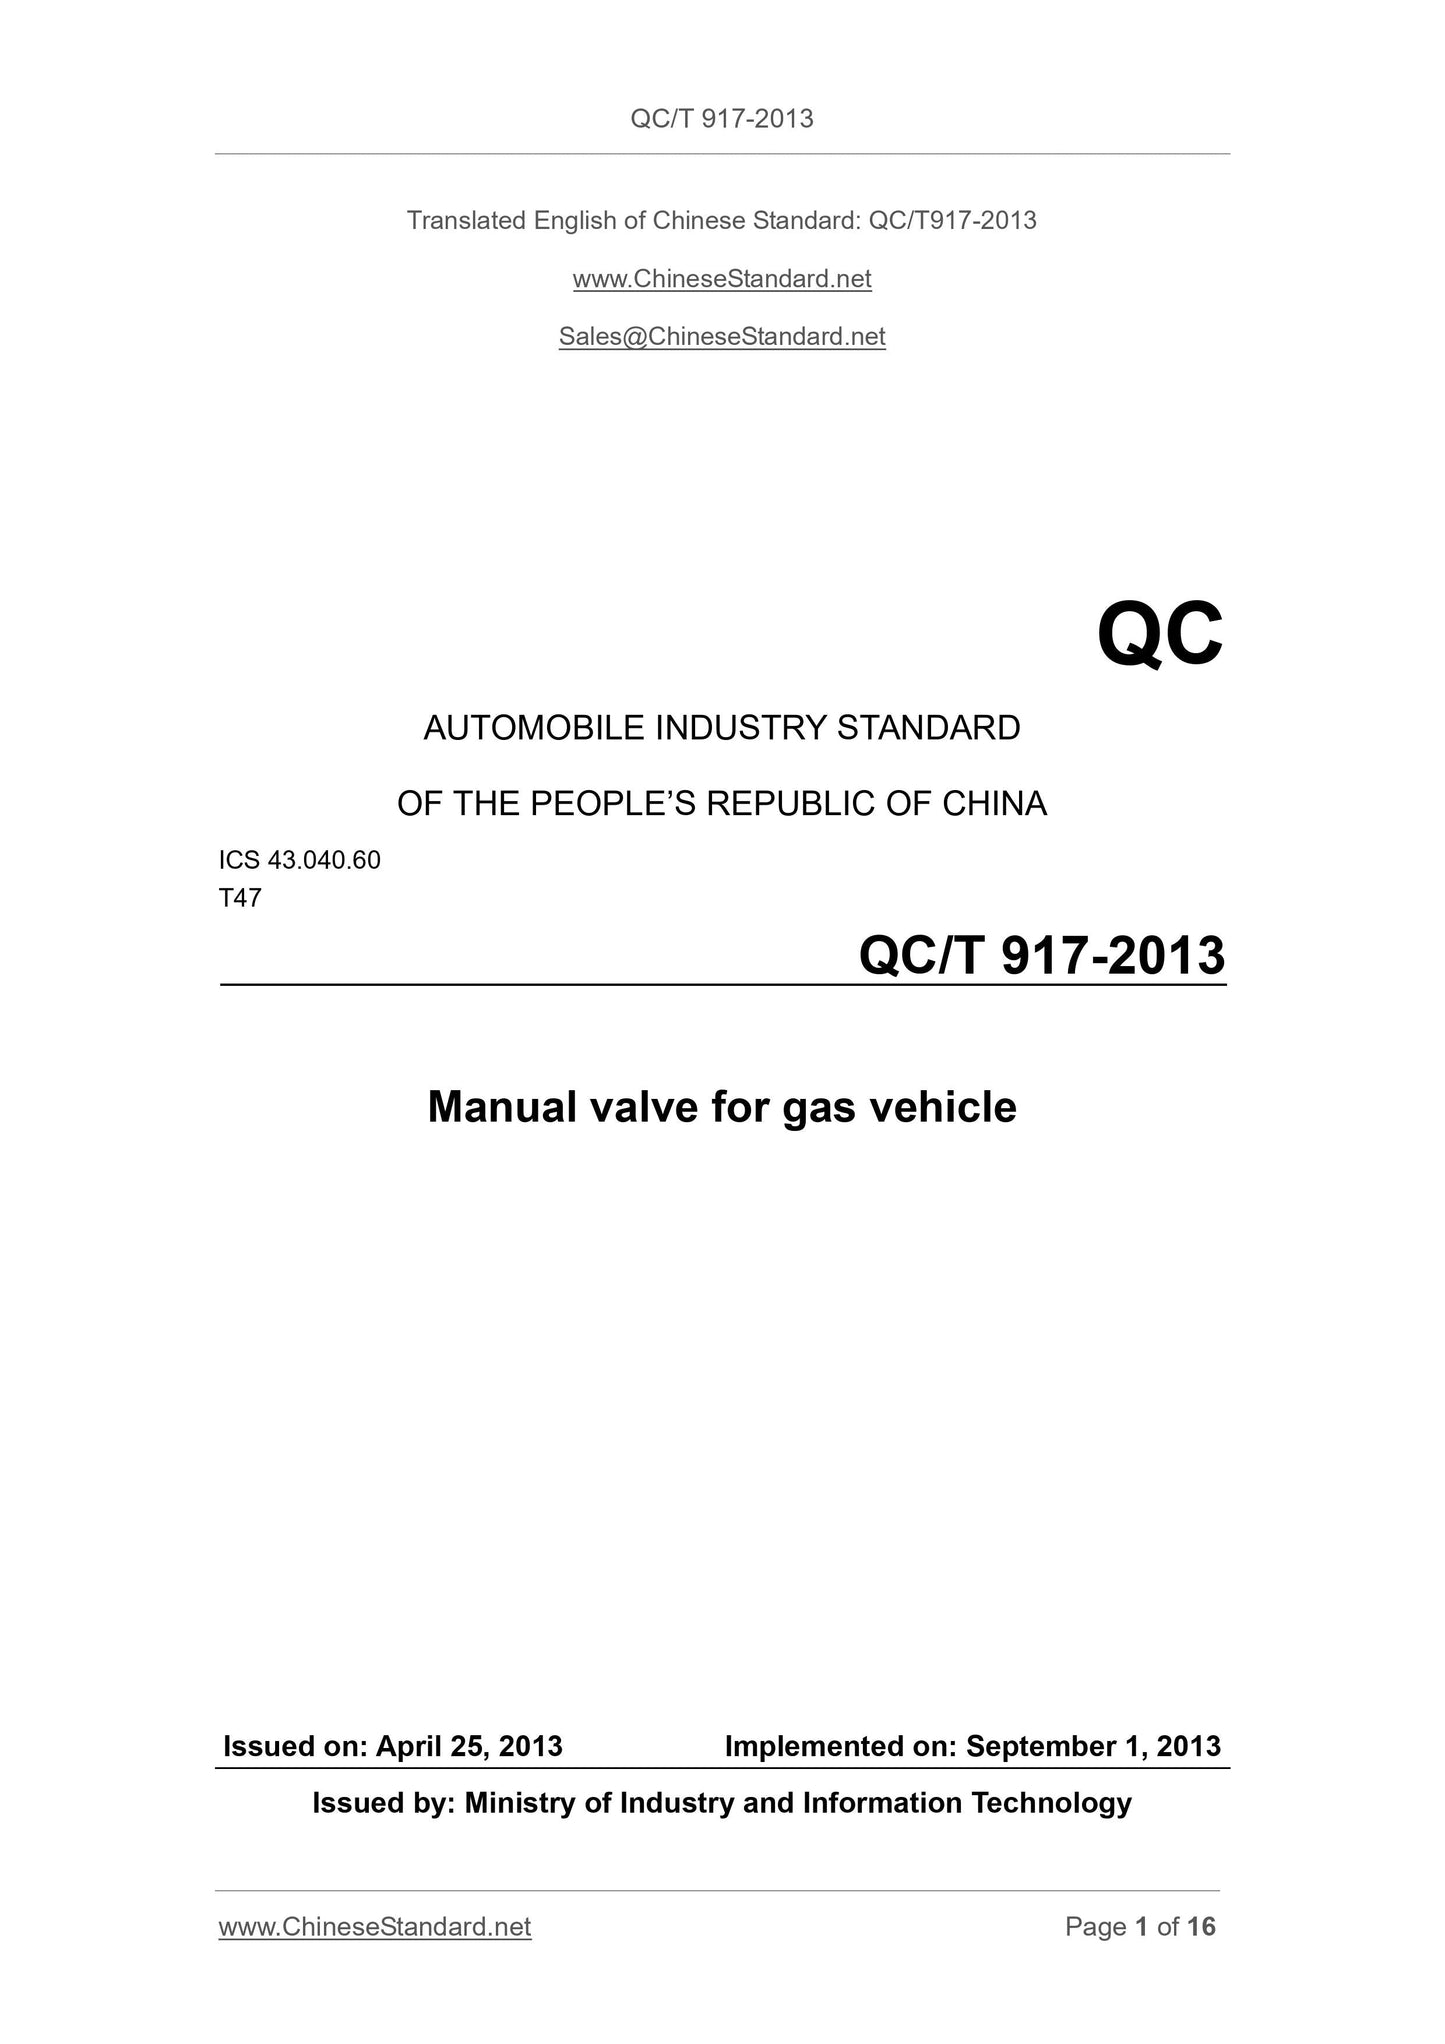 QC/T 917-2013 Page 1